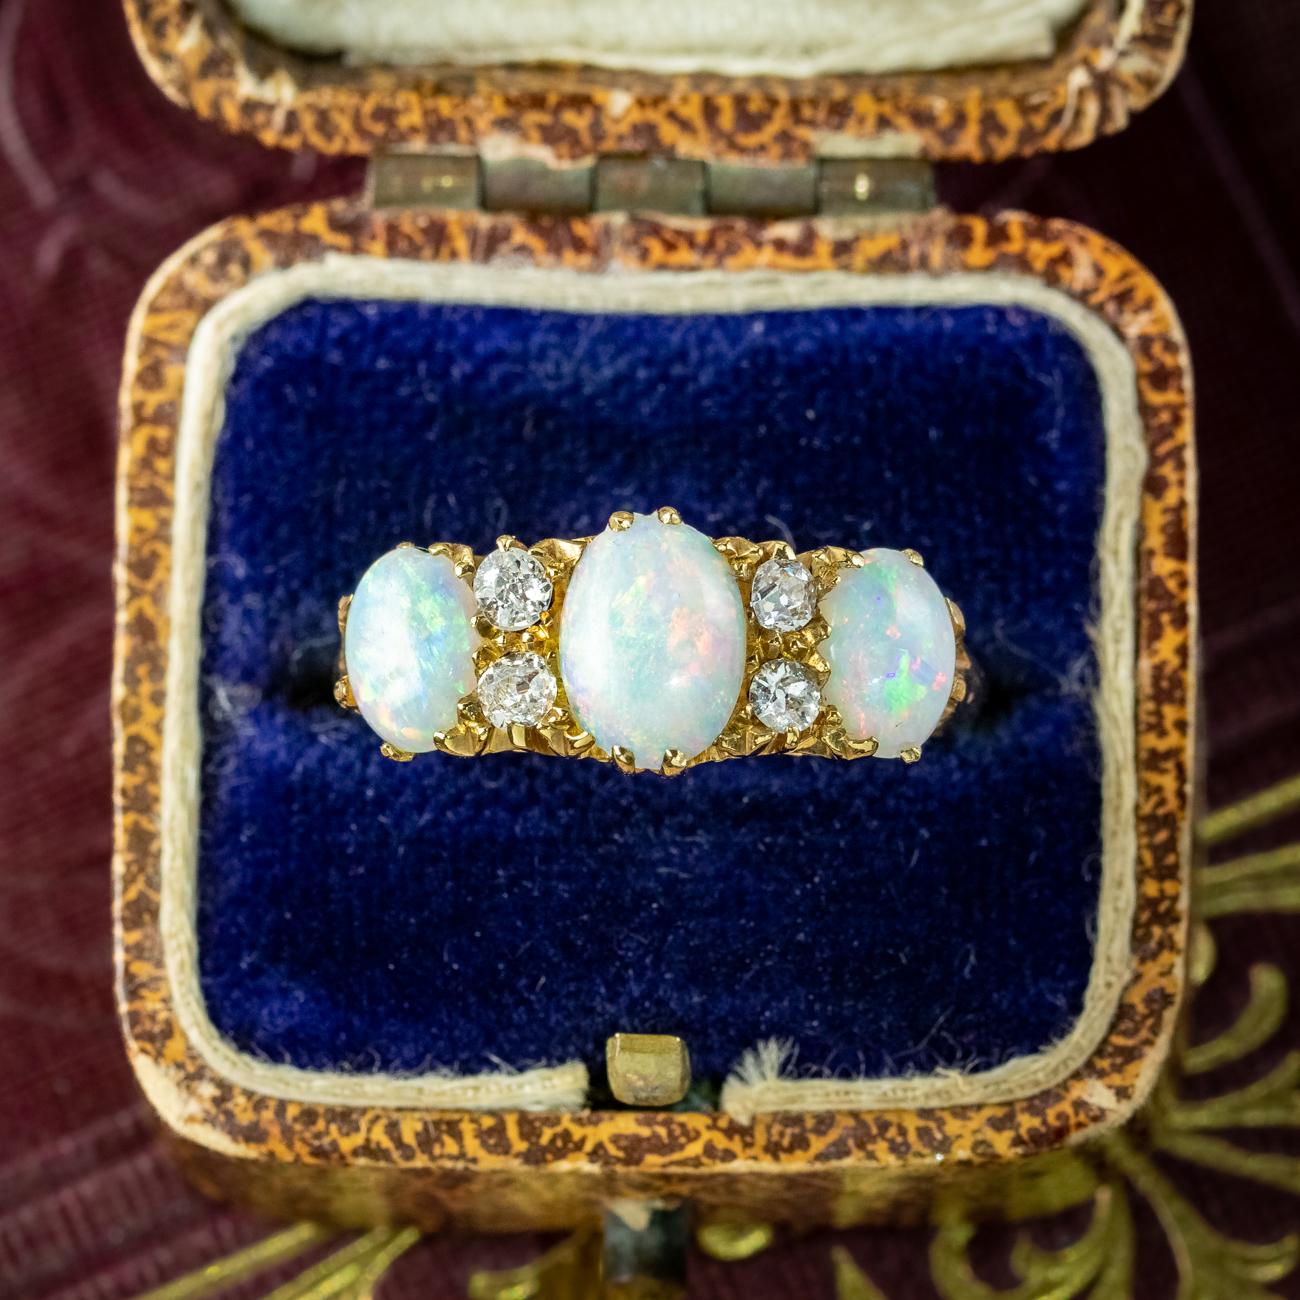 Antique Edwardian Opal Diamond Ring 2.4 Carat Opal Dated 1906 For Sale 2